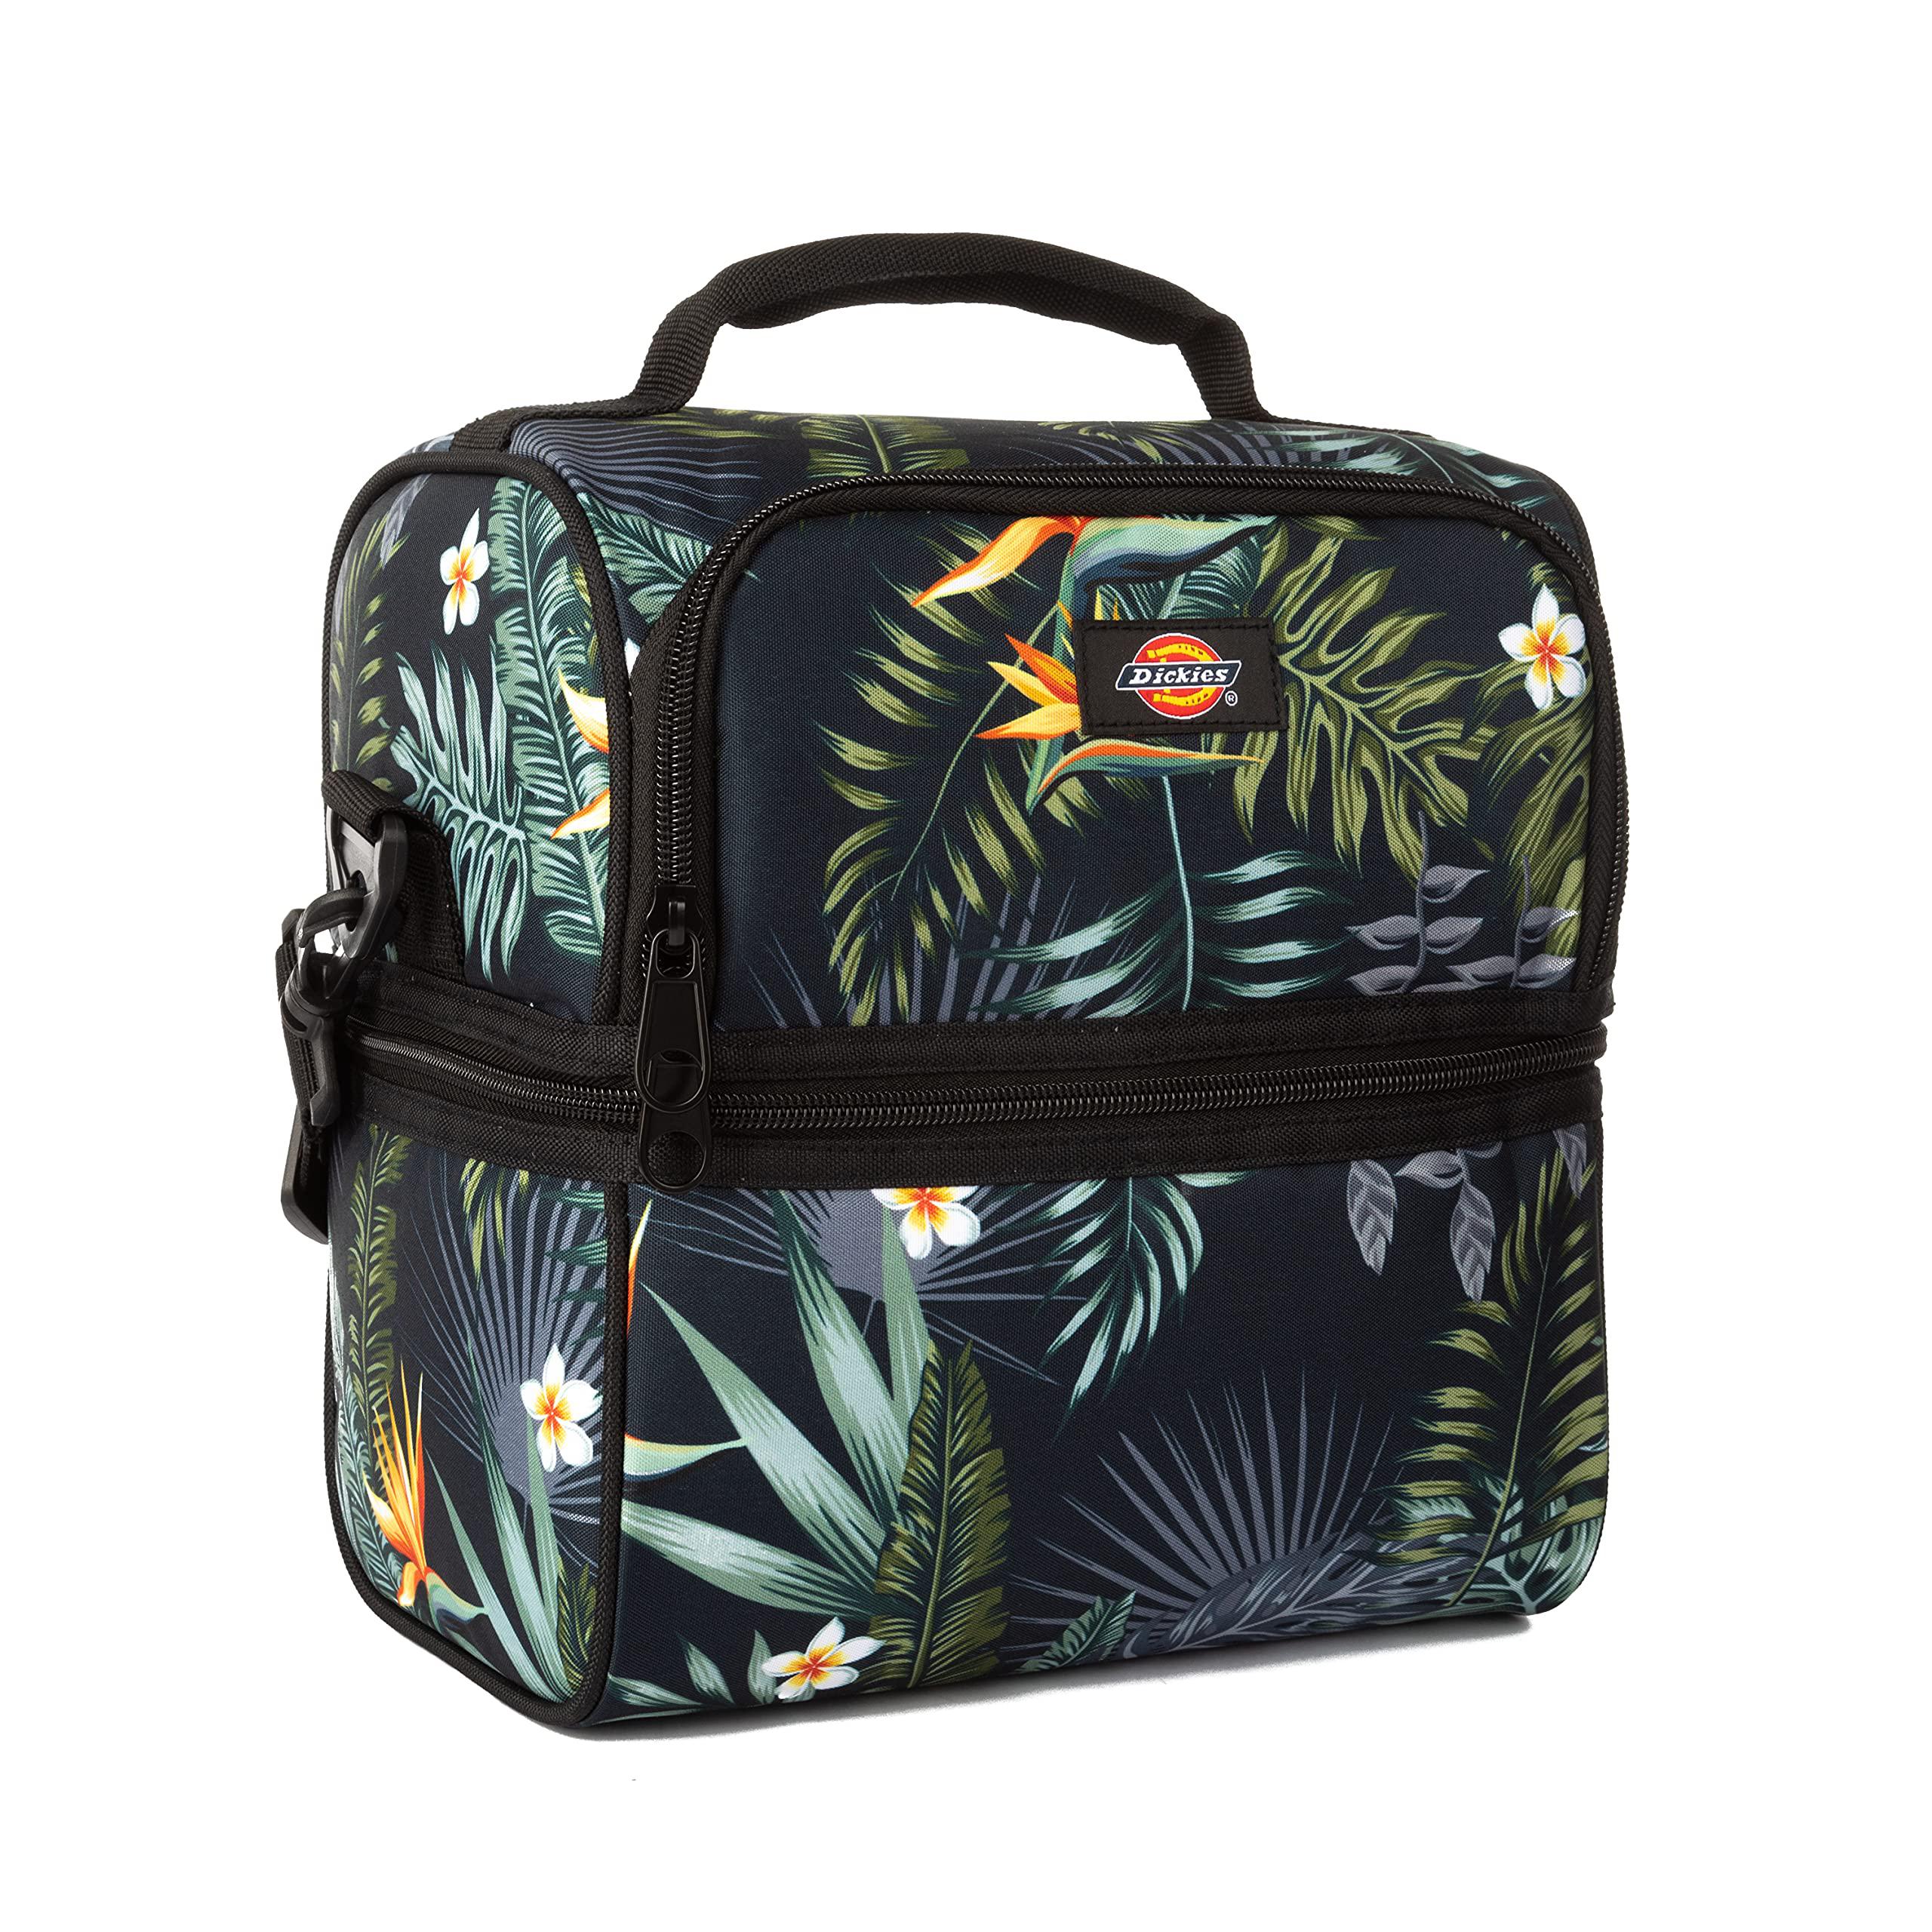 dickies insulated multi-compartment lunch box reusable beach cooler tote bag (tropical flowers)